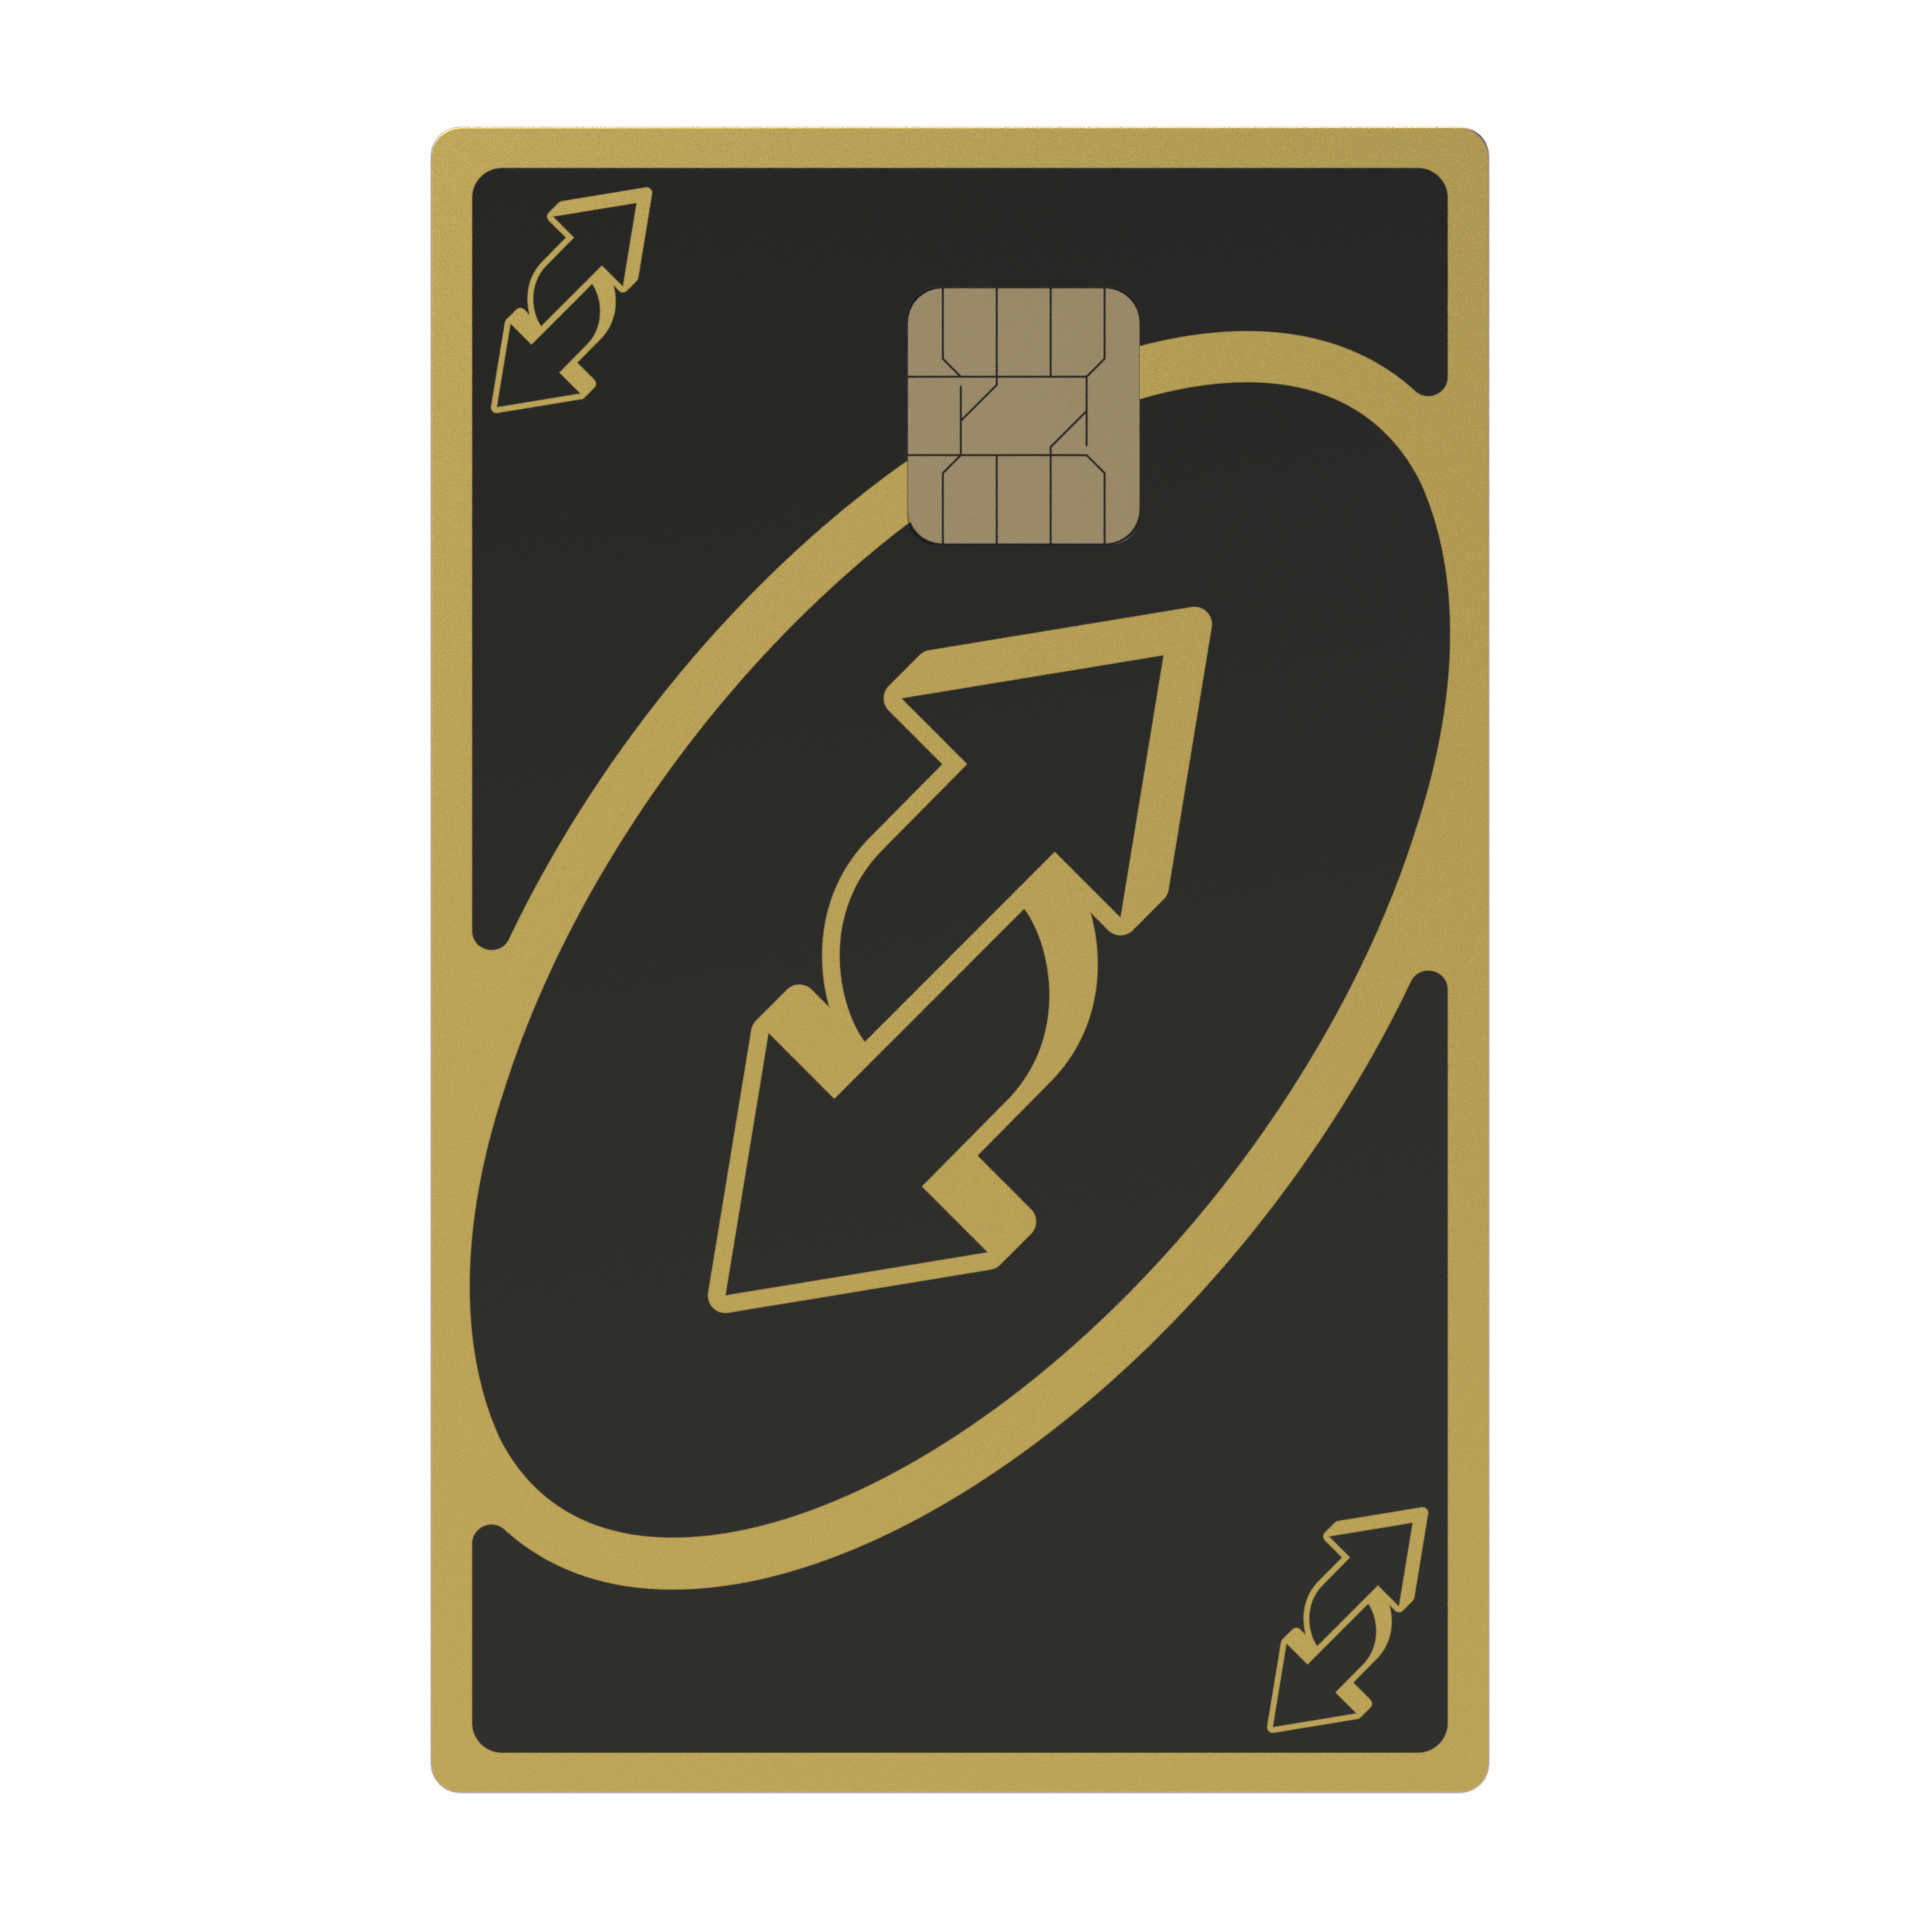 Uno reverse card | Greeting Card